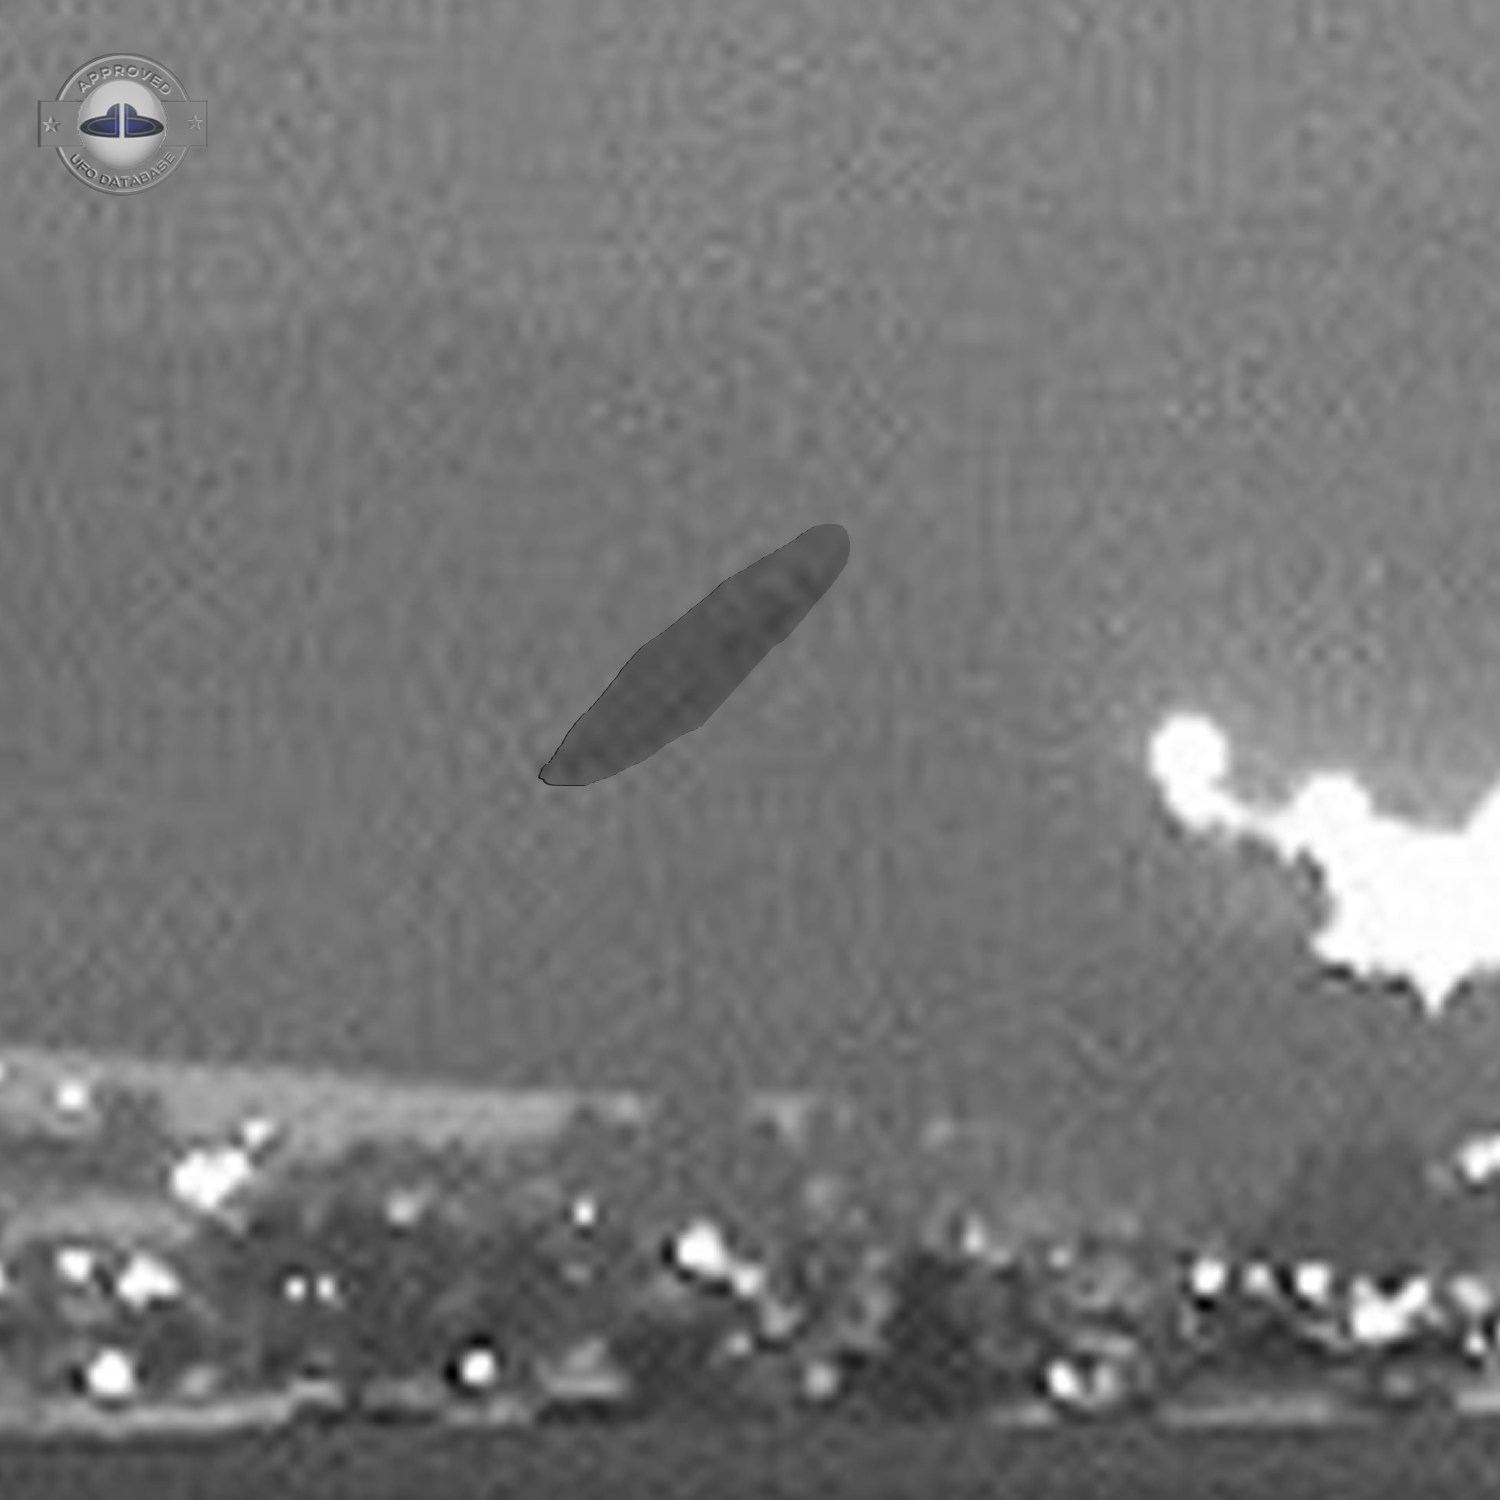 Live Cam capture of UFO USO near water surface | Geisenfeld, Germany UFO Picture #203-3